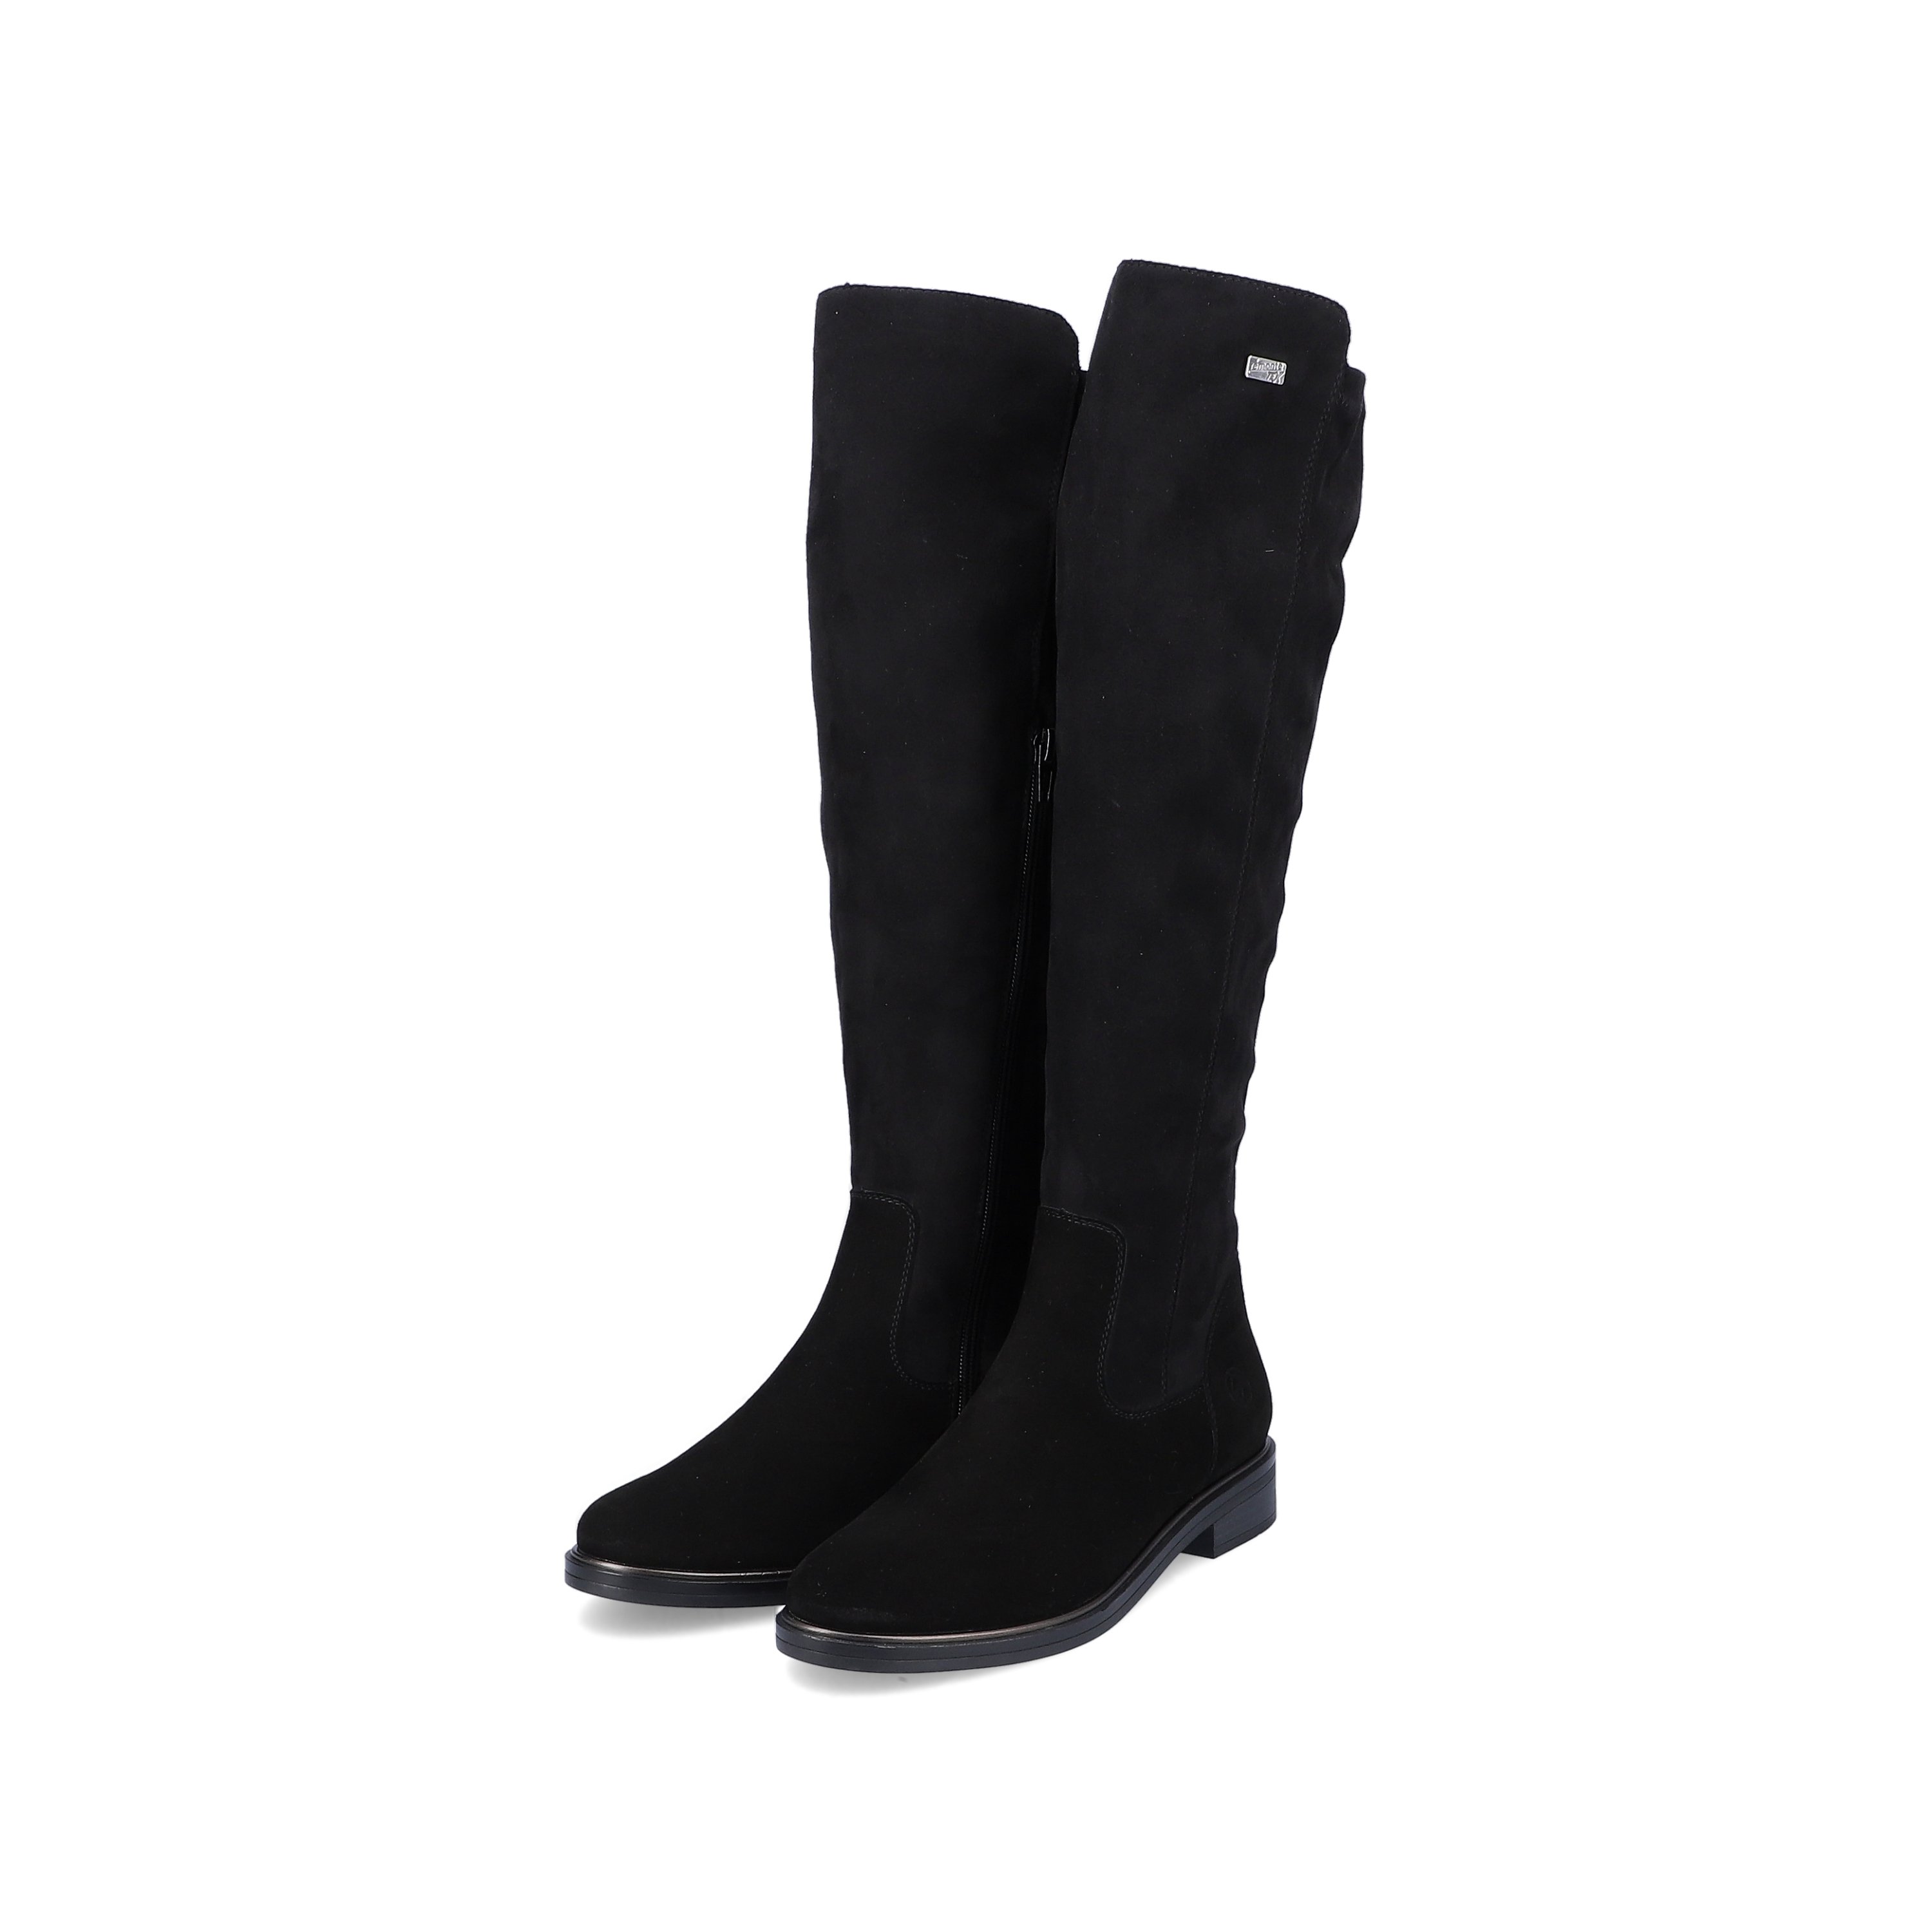 Jet black remonte women´s high boots D8387-02 with cushioning profile sole. Shoe laterally